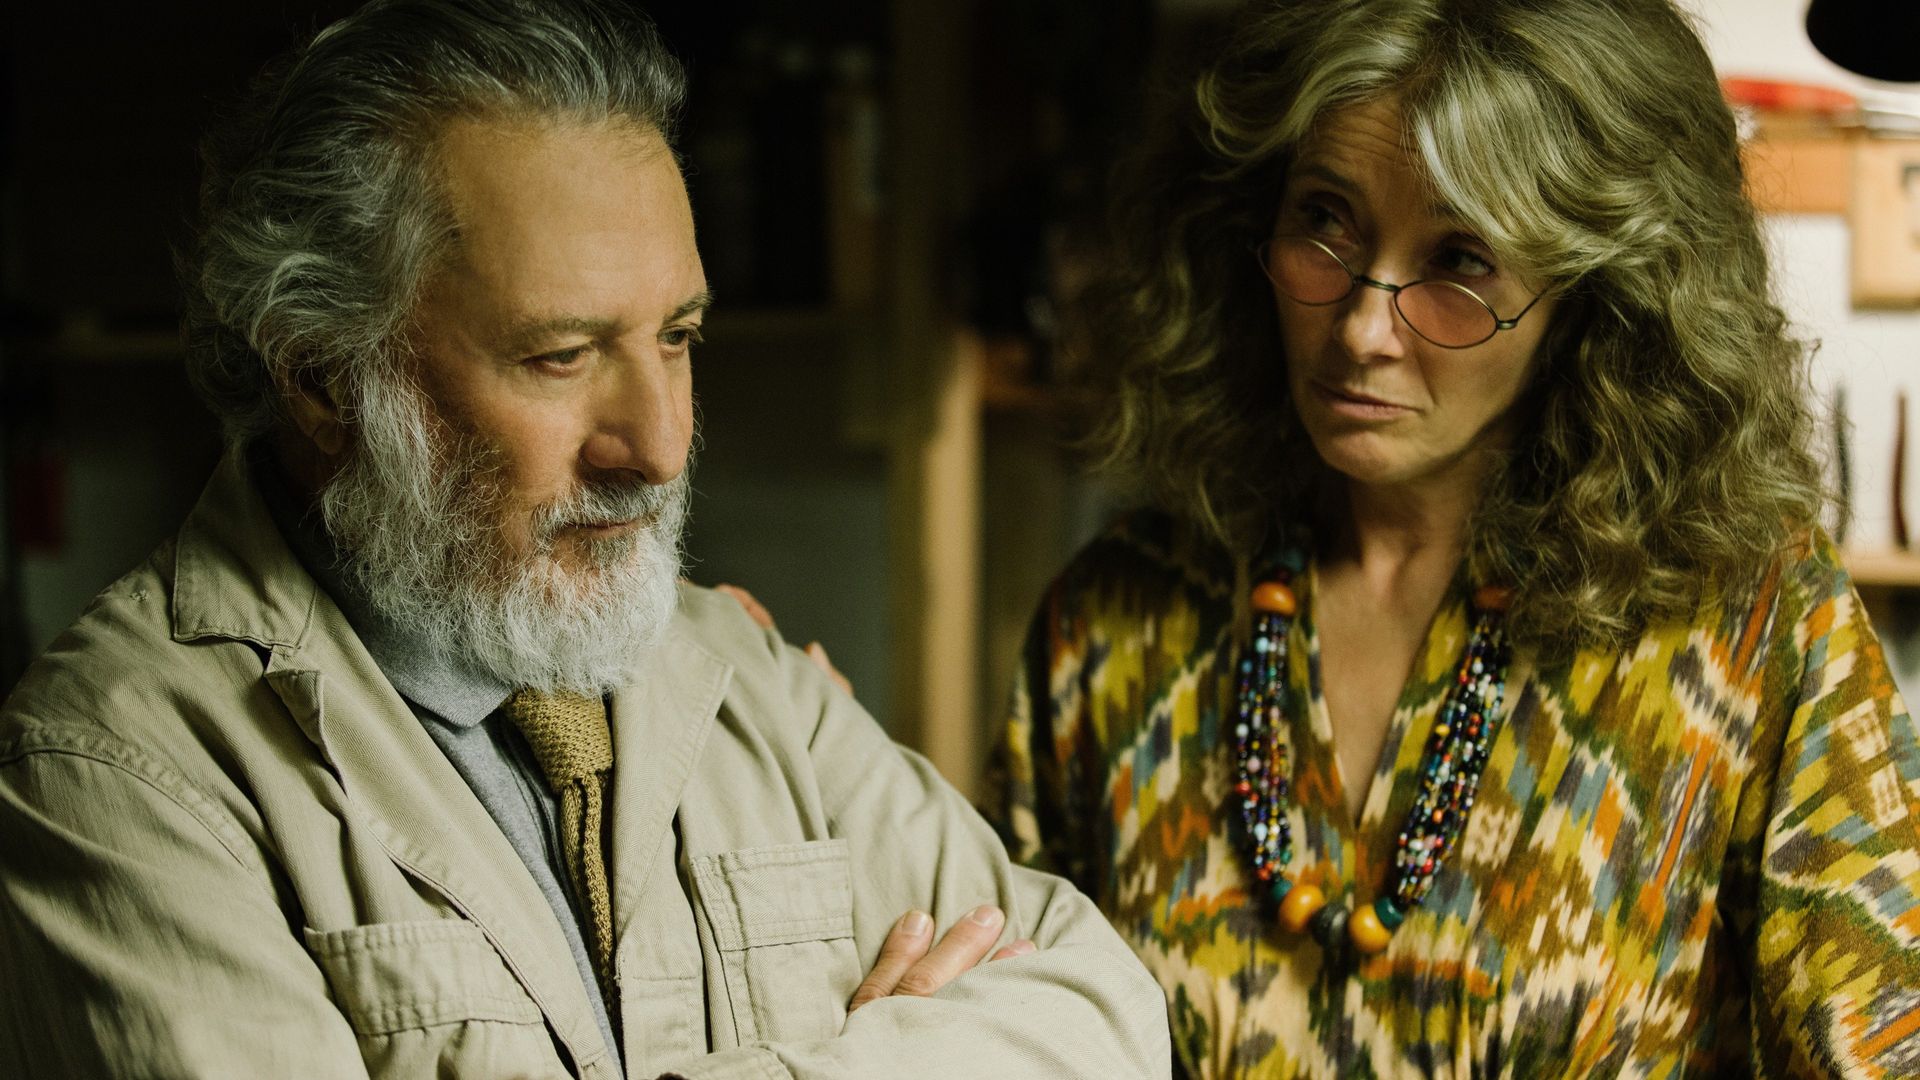 The Meyerowitz Stories (New and Selected) Backdrop